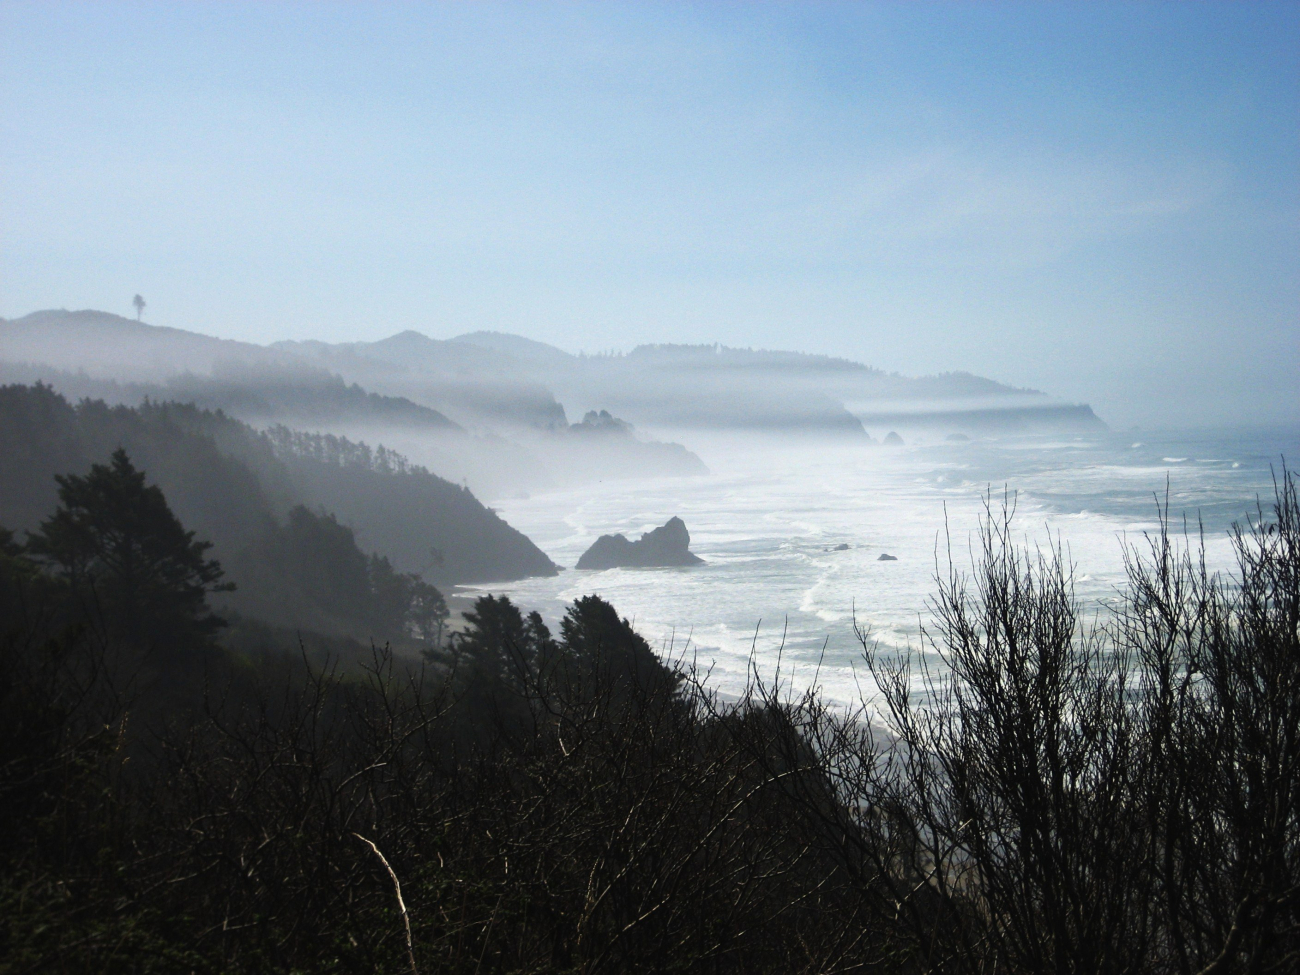 Layers of fog at different levels on the Oregon coast highway